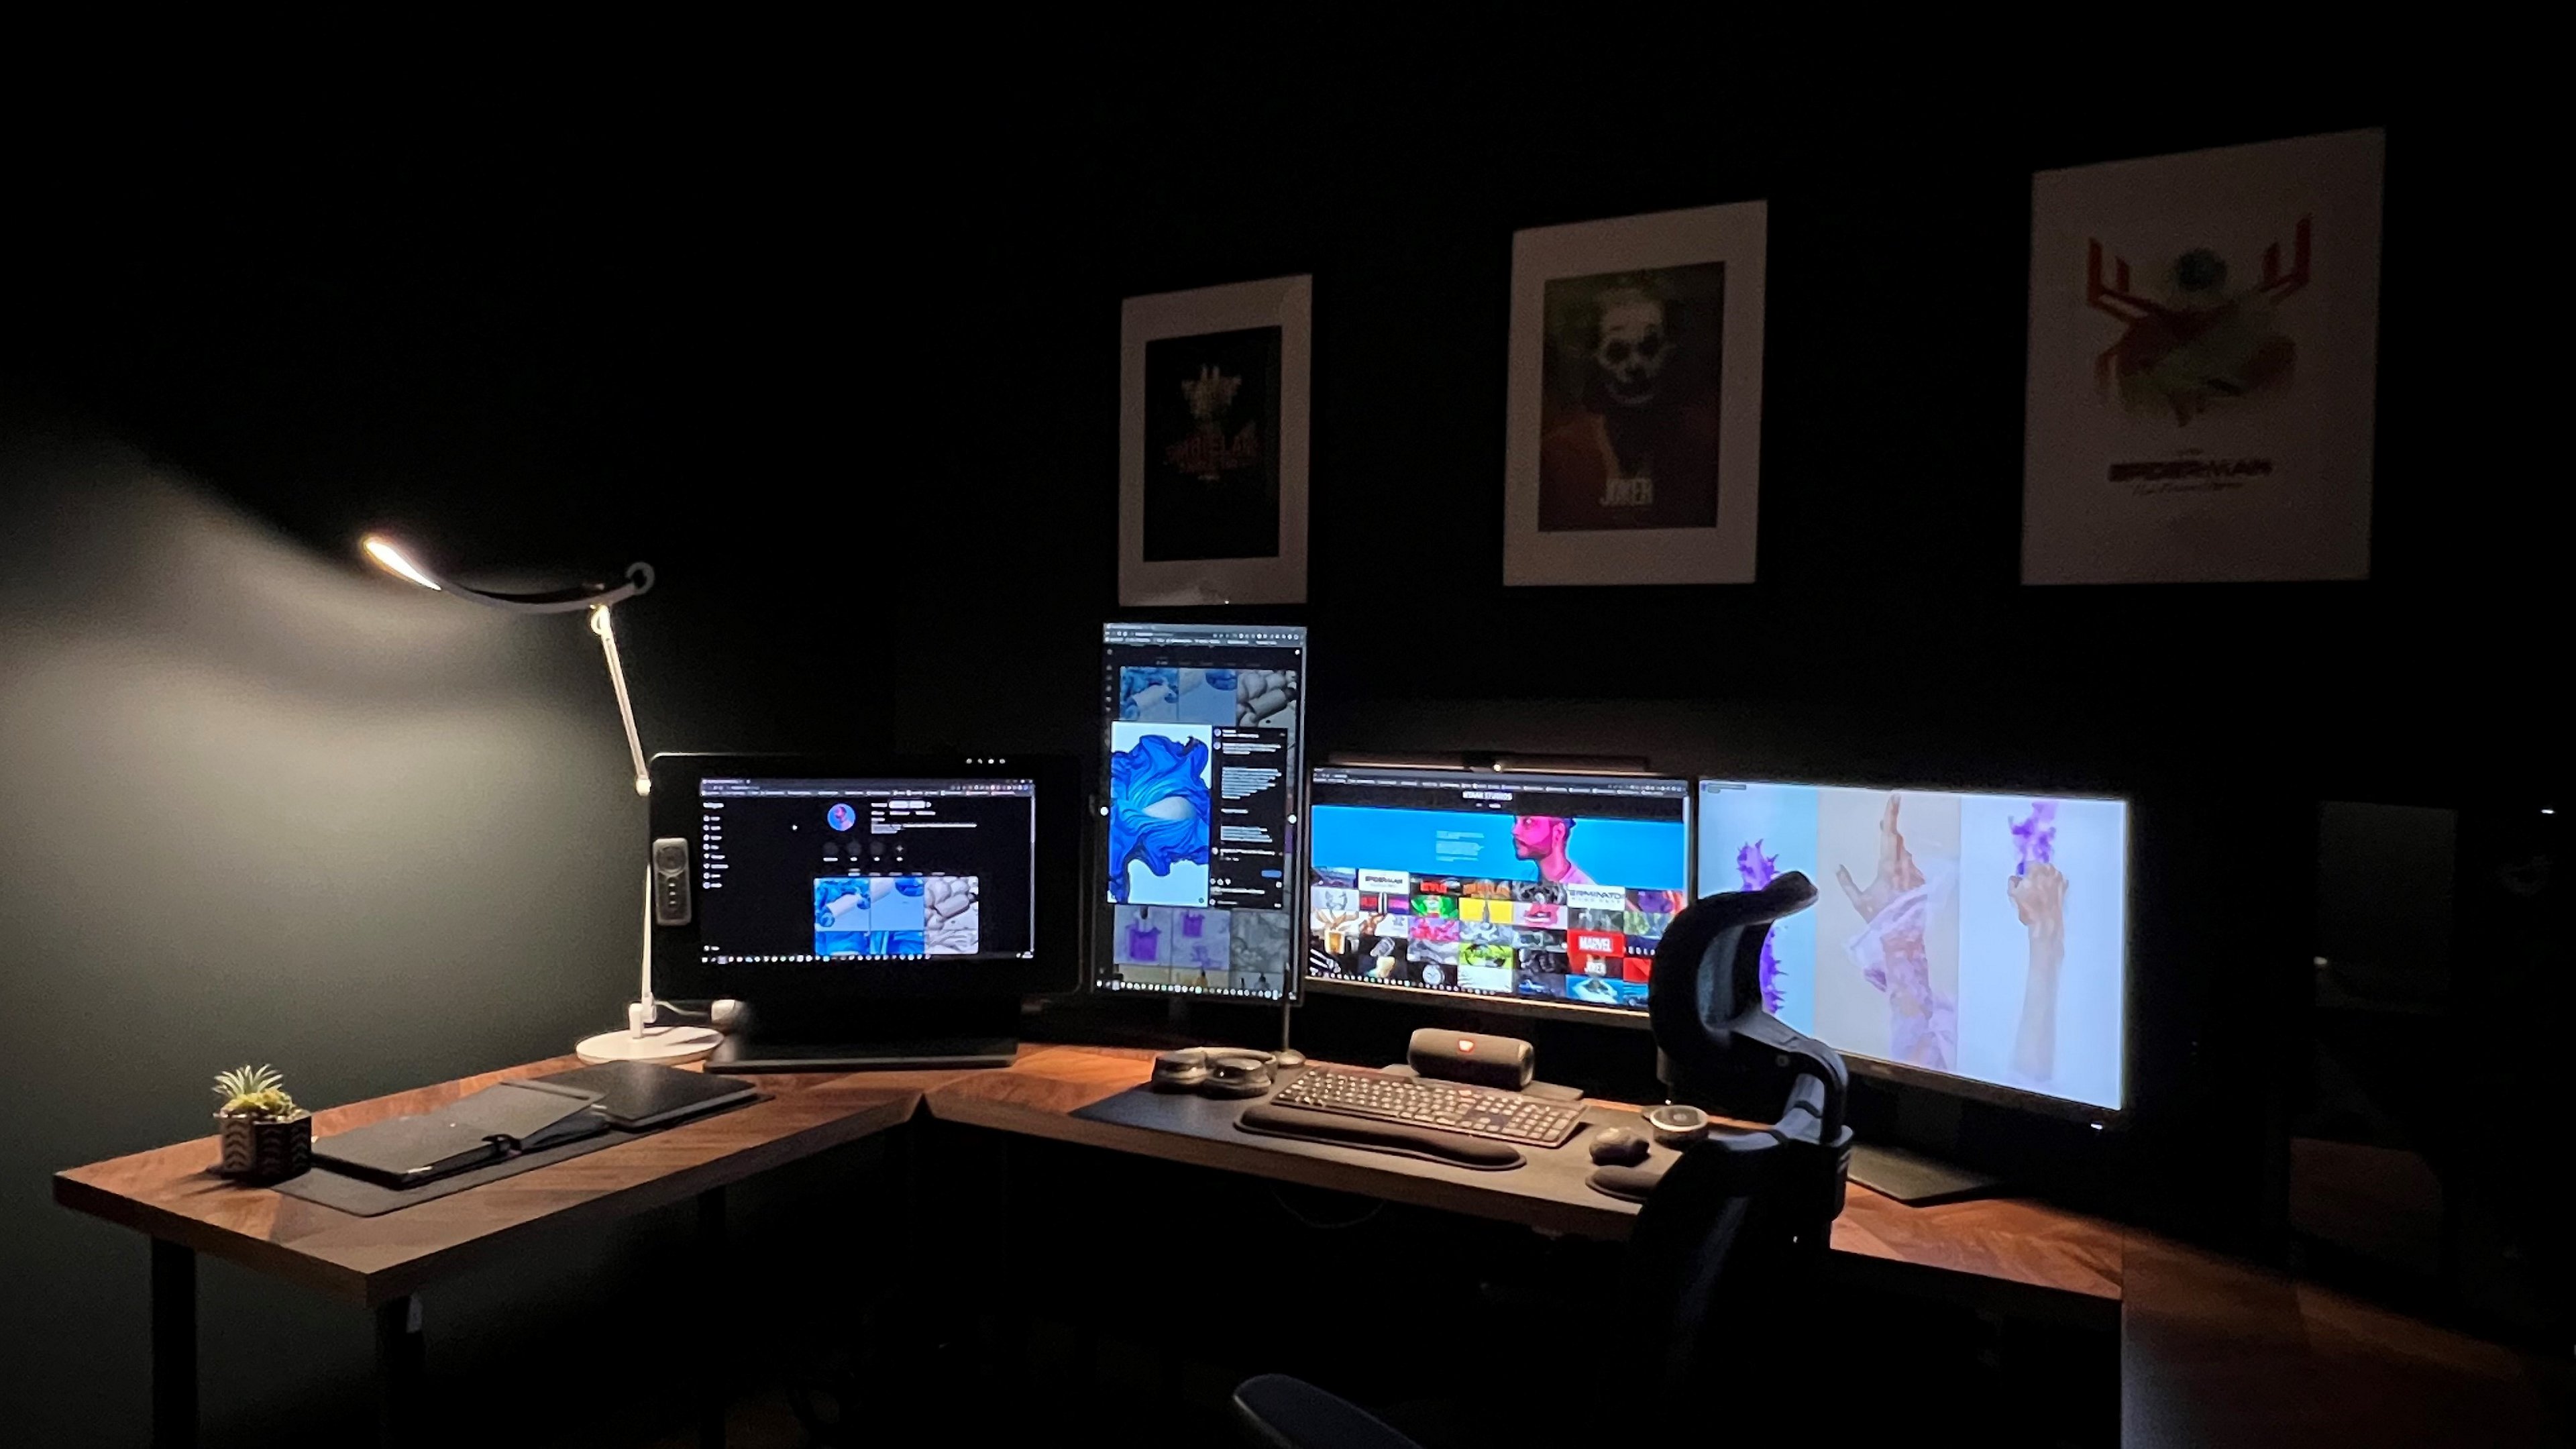 3D Motion Designer shares his experience and his review of BenQ ScreenBar Halo monitor light bar and e-Reading Desk Lamp.